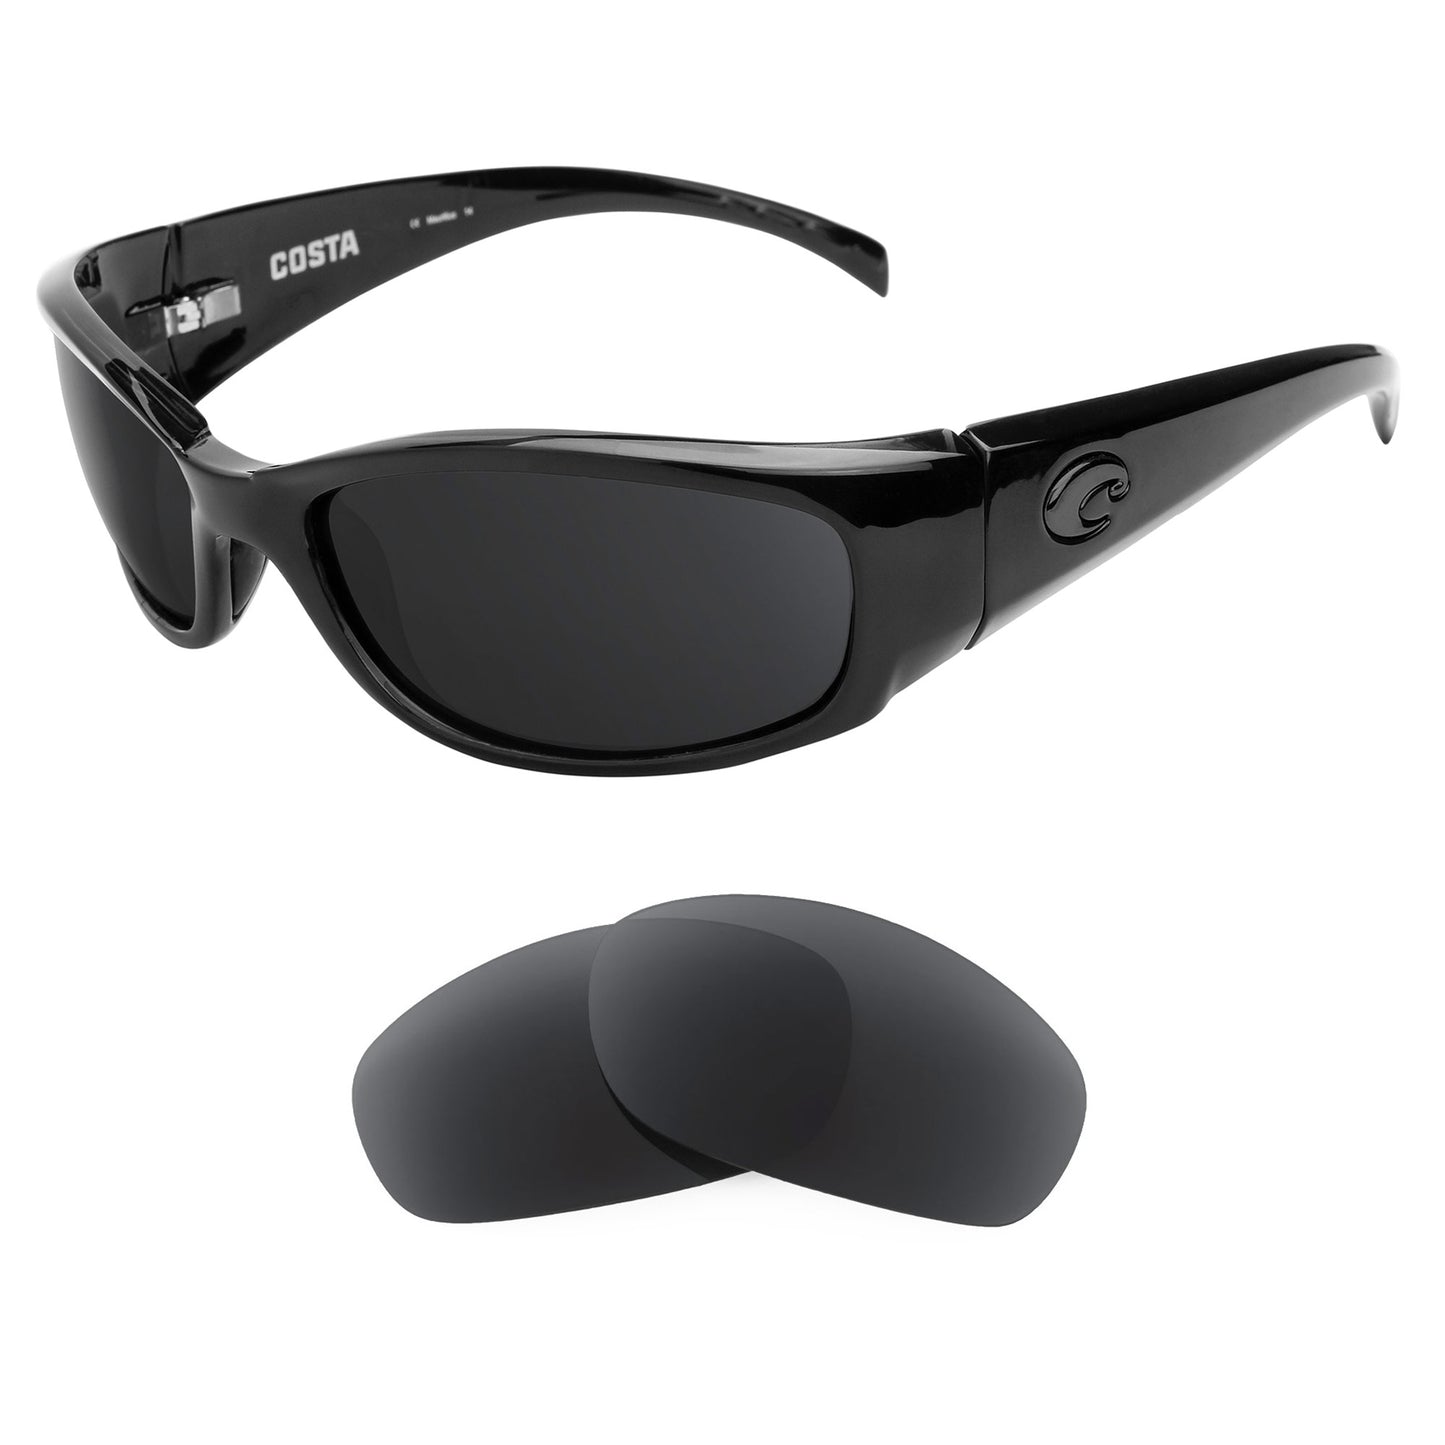 Costa Hammerhead sunglasses with replacement lenses